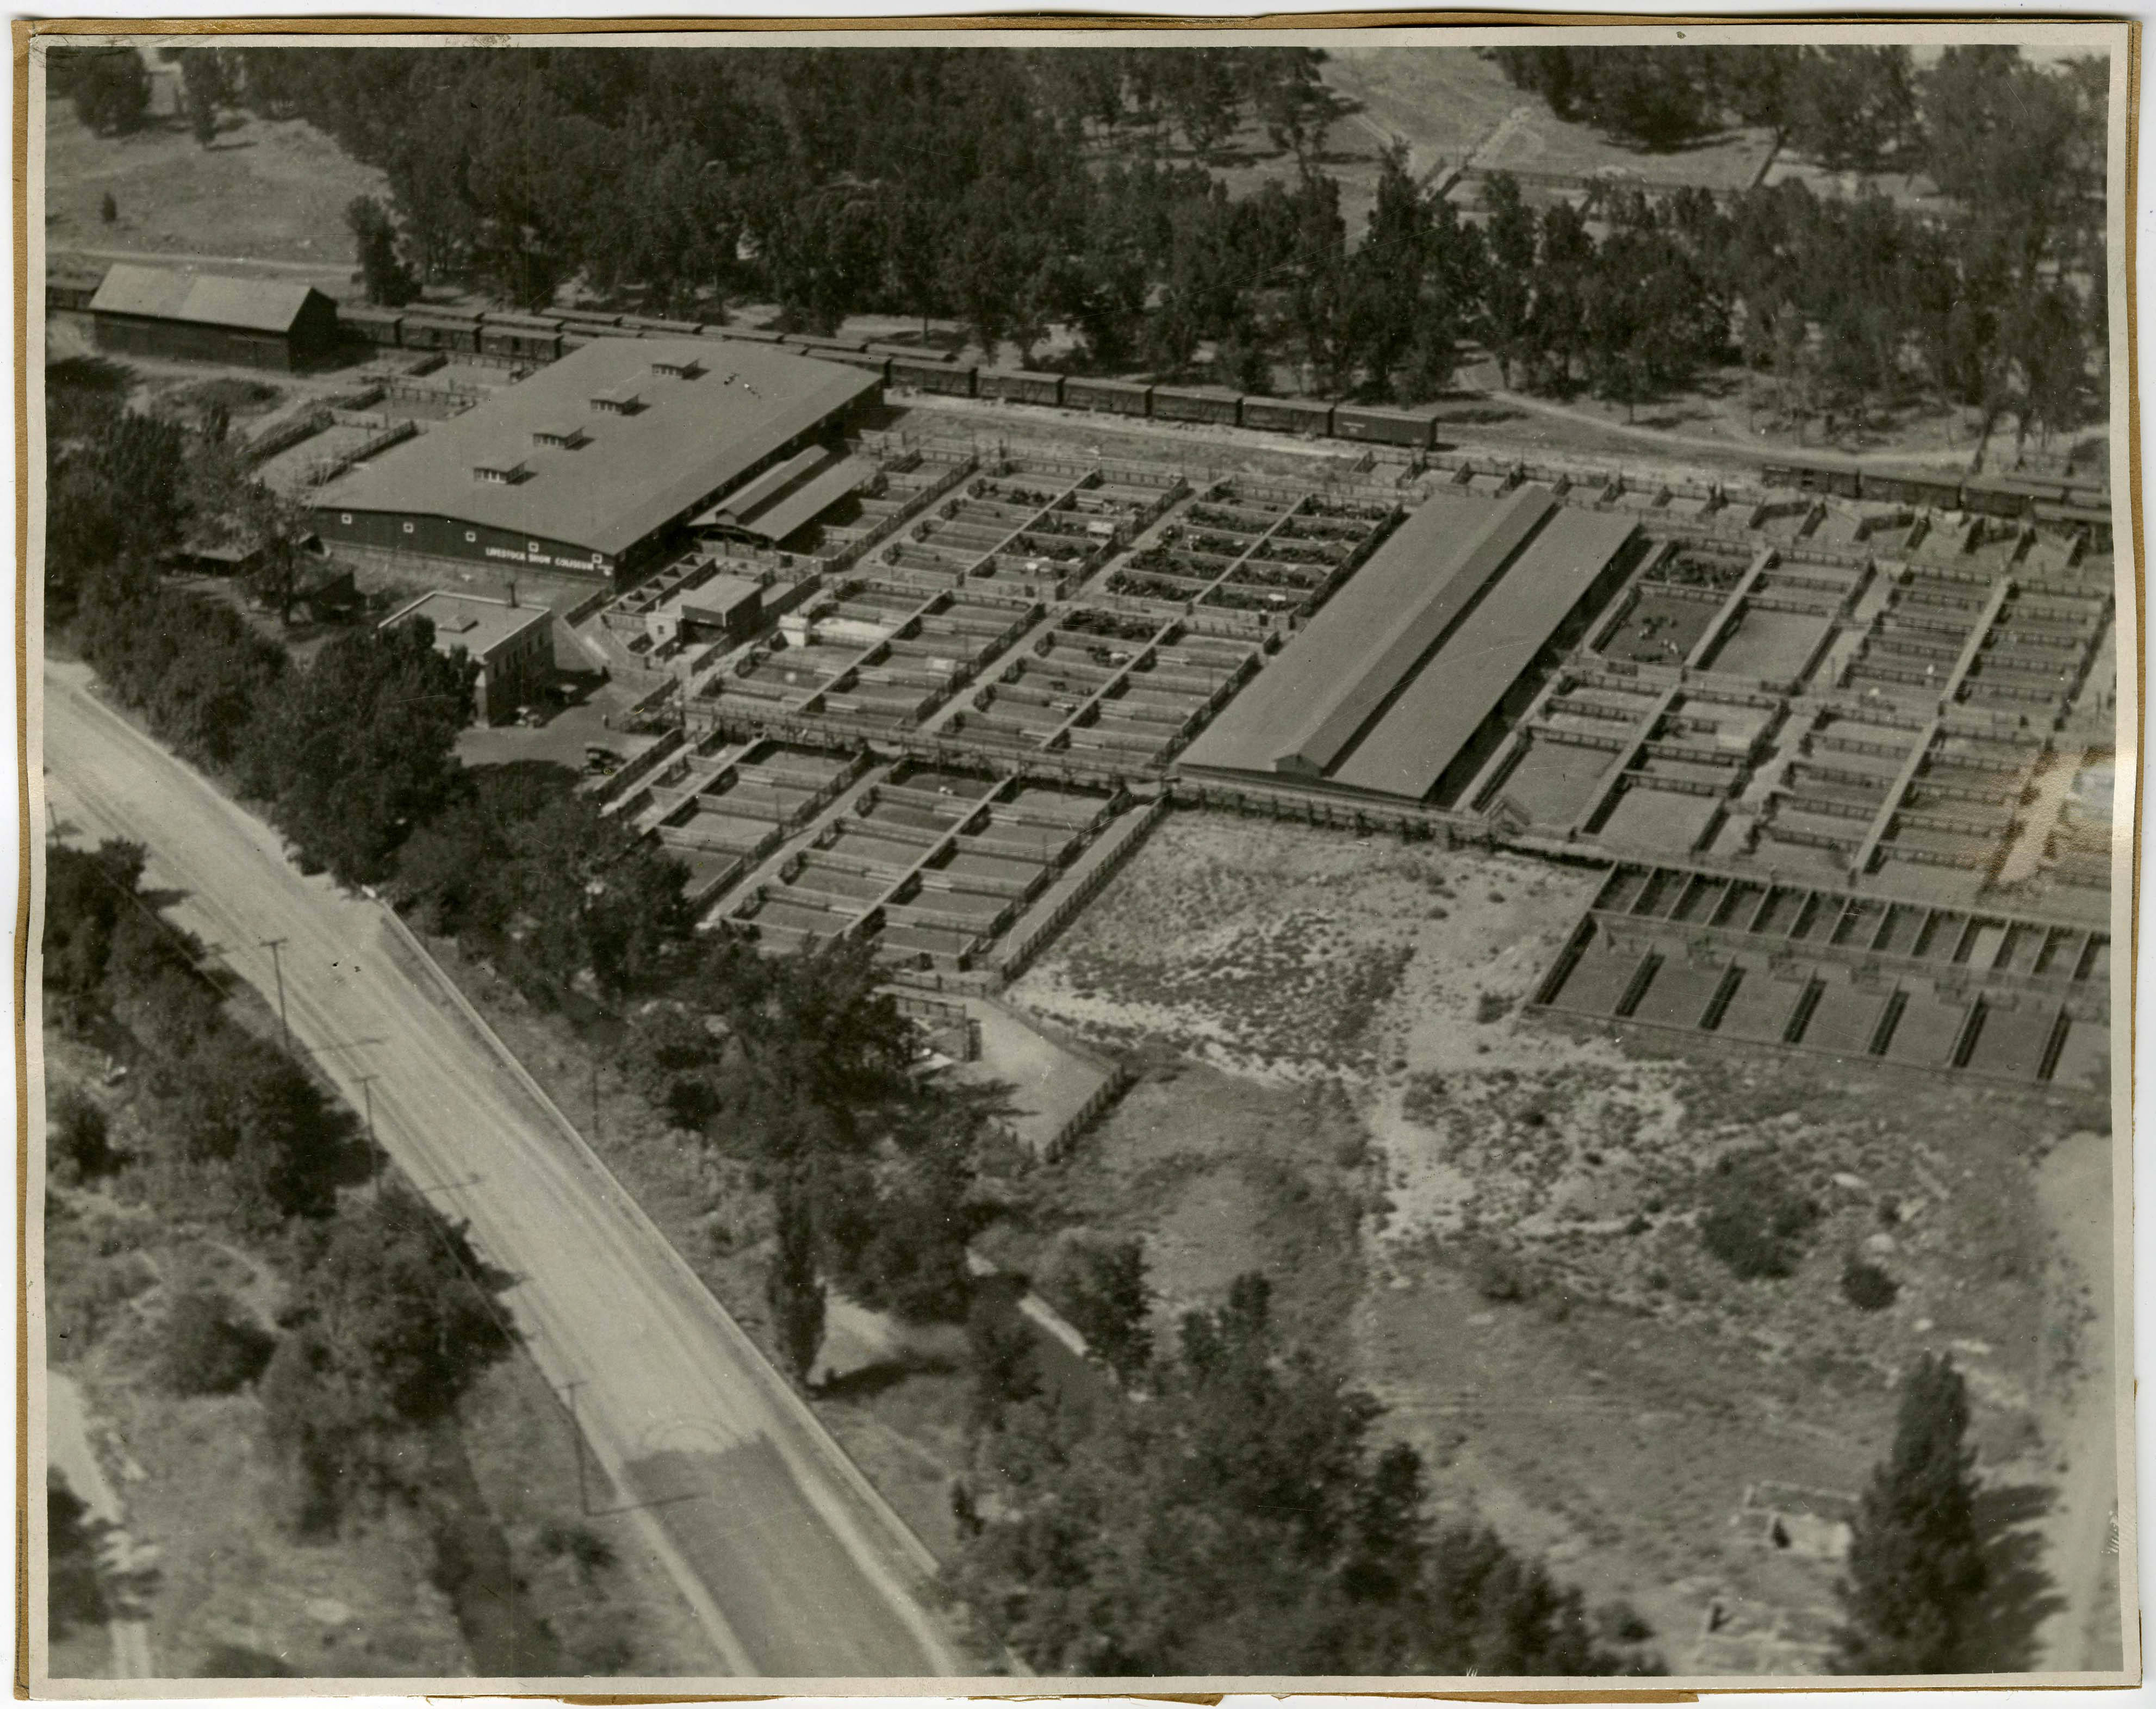 1930 Aerial view of the Ogden Union Stockyards. Special Collections Department, Stewart Library, Weber State University